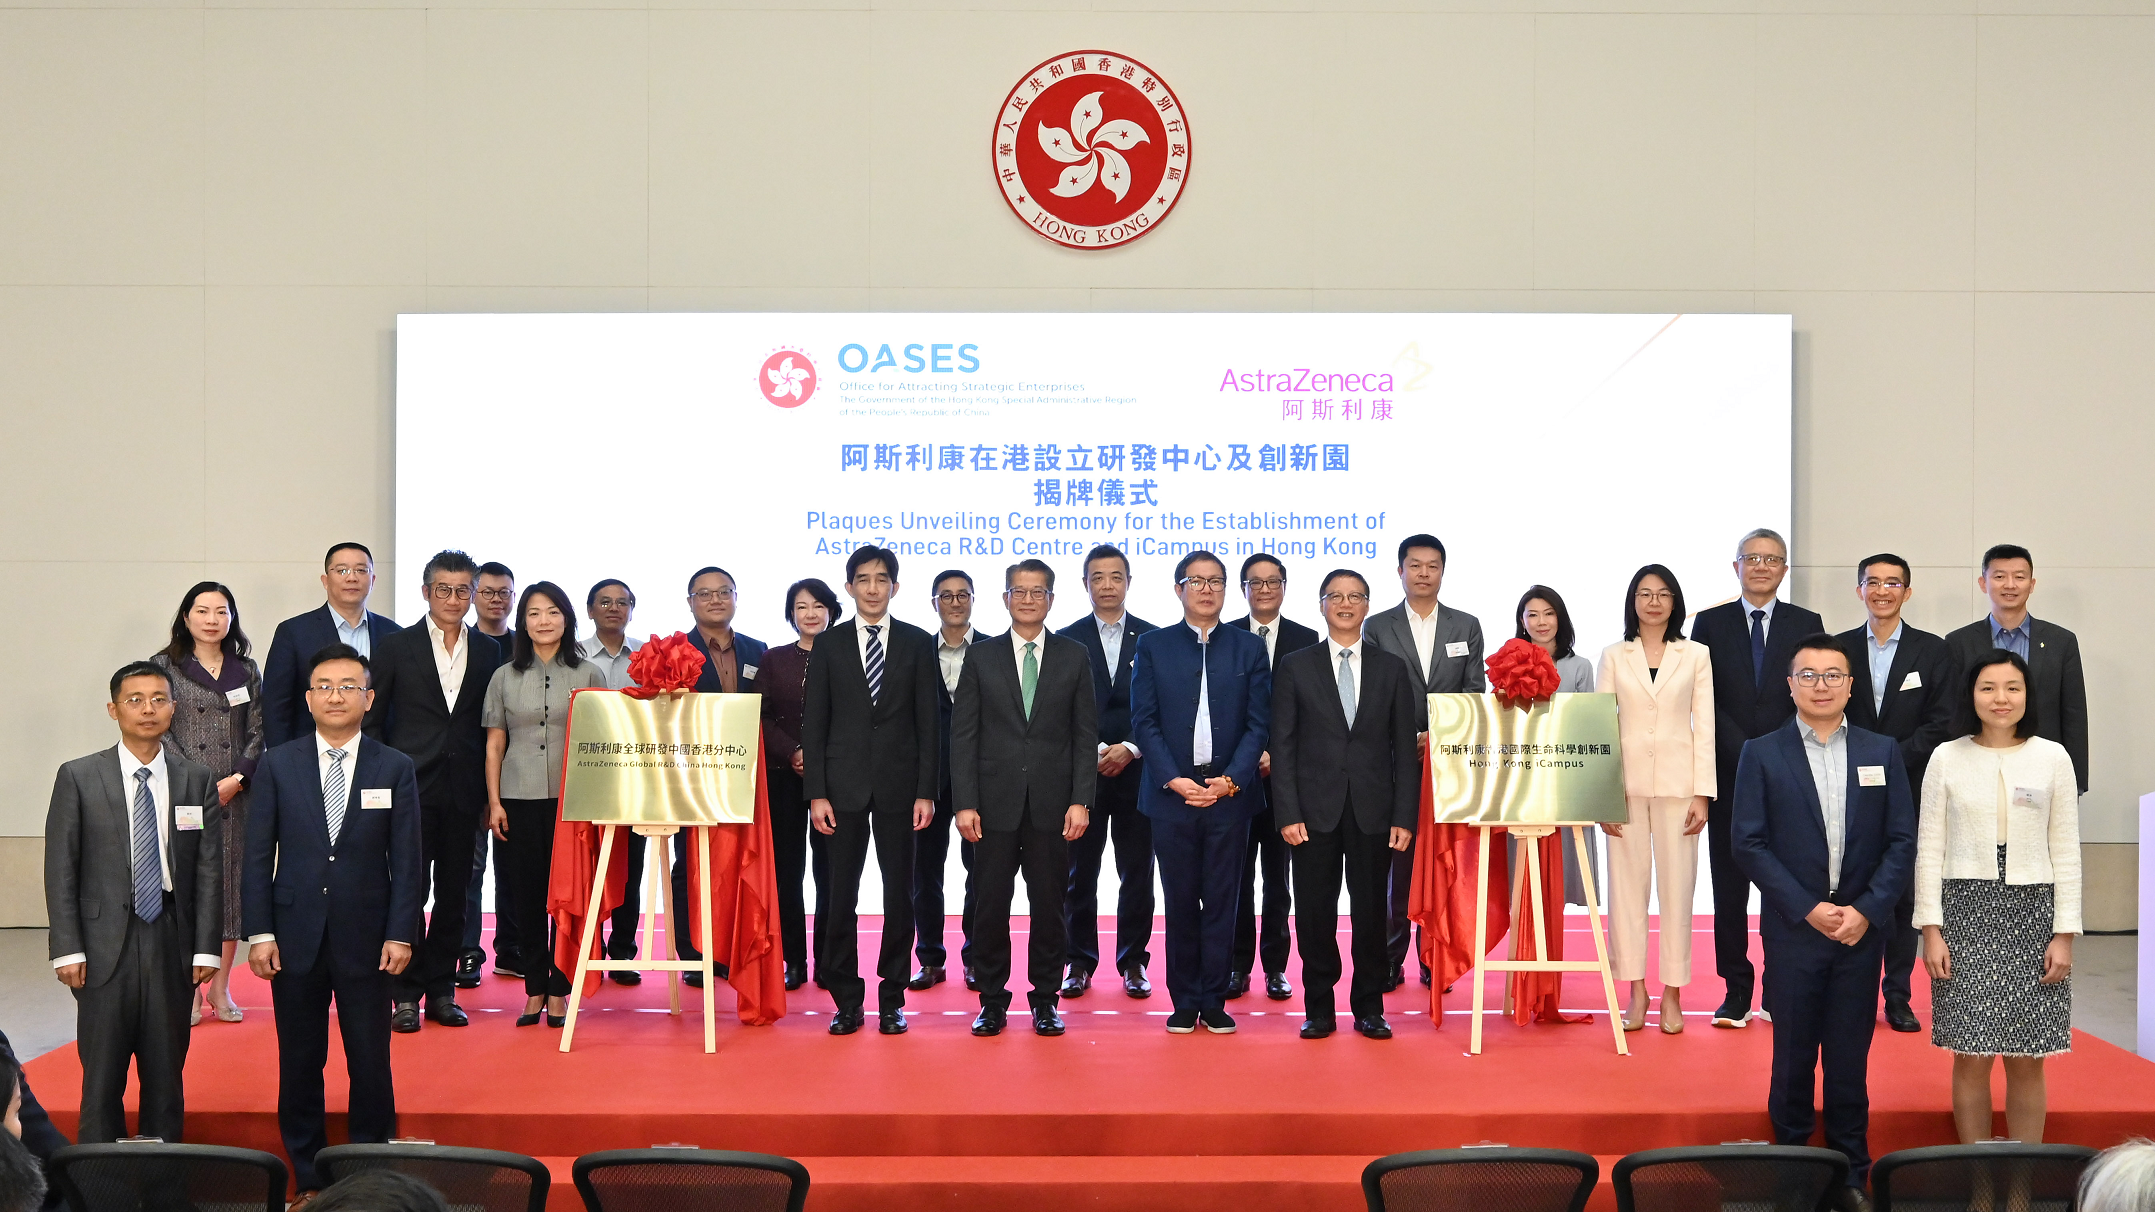 The Financial Secretary, Mr Paul Chan, attended the Plaques Unveiling Ceremony for the Establishment of AstraZeneca R&D Centre and iCampus in Hong Kong today (November 24). Photo shows Mr Chan (second row, seventh right); the Executive Vice President, International and China President of AstraZeneca, Mr Leon Wang (second row, sixth right); the Director-General of the Office for Attracting Strategic Enterprises, Mr Philip Yung (second row, eighth right), and other guests at the ceremony.